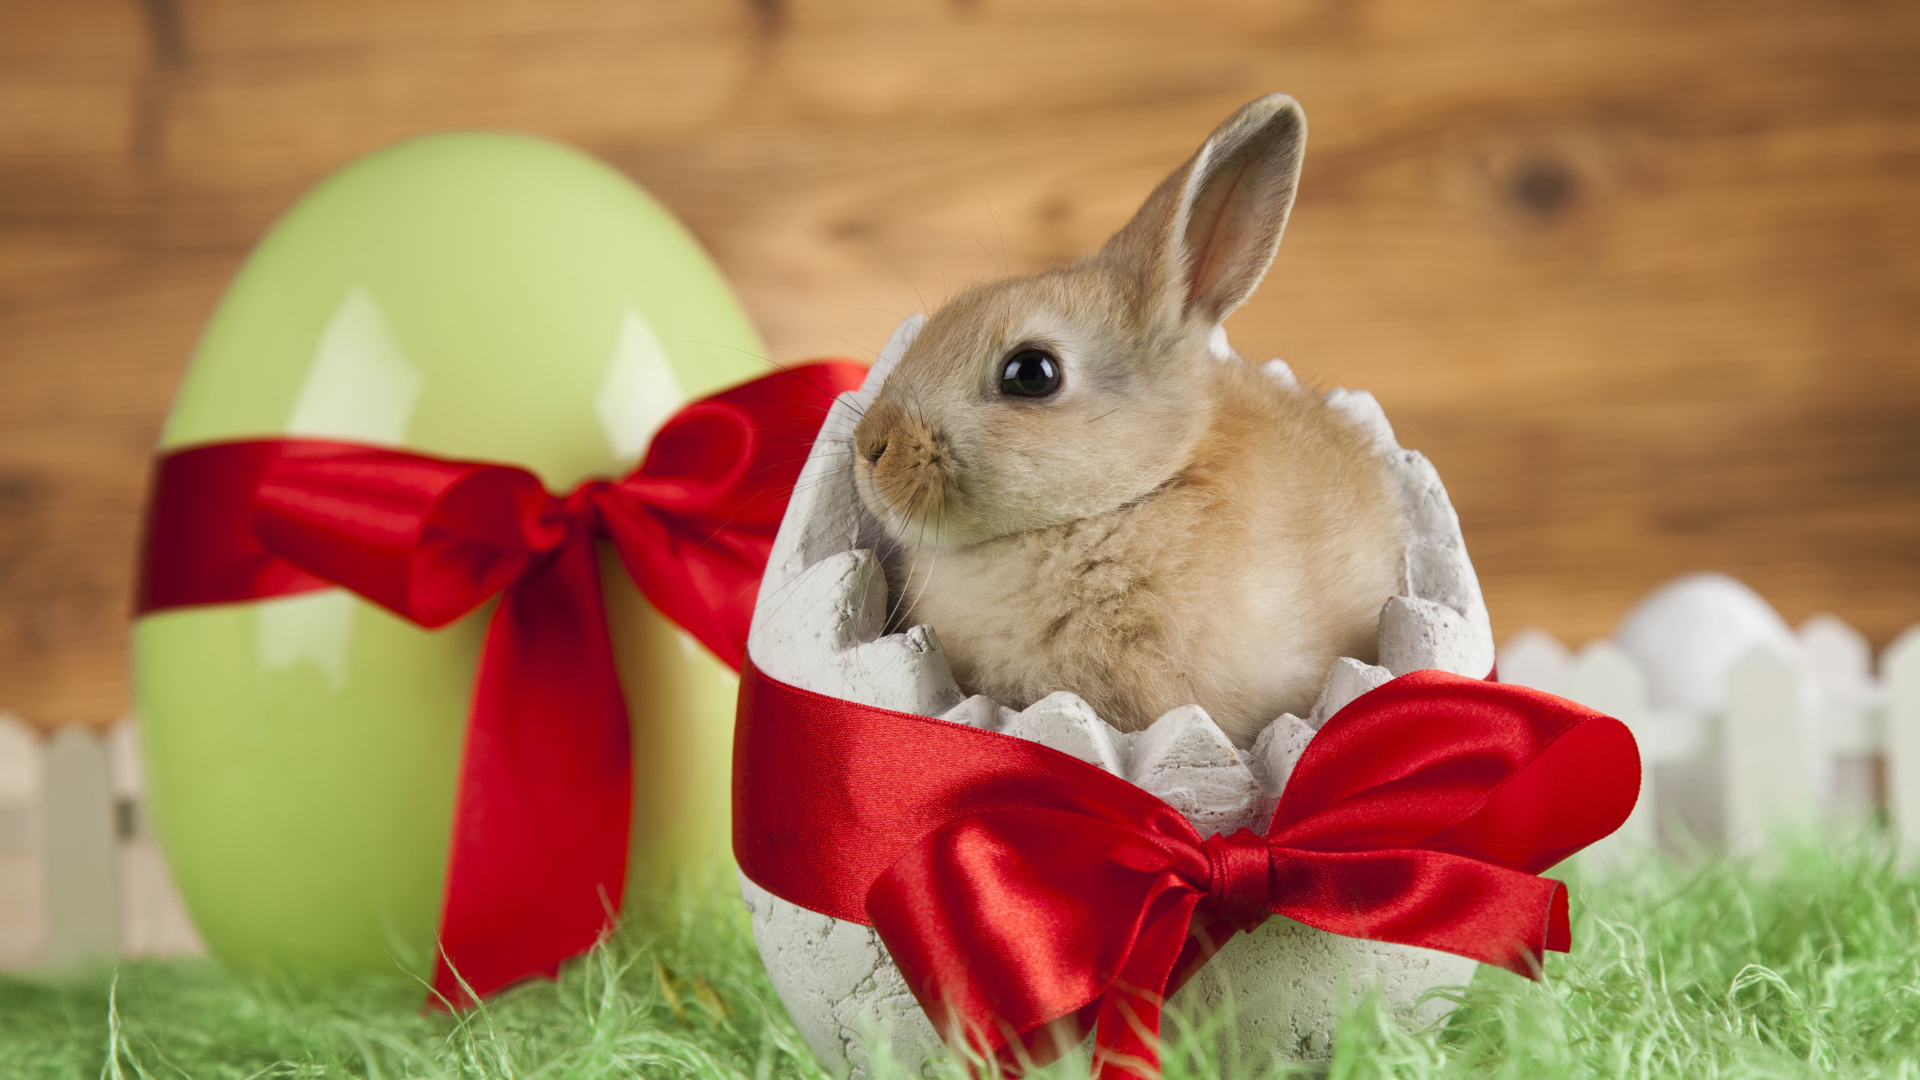 Little decorative rabbit in an egg with a red bow